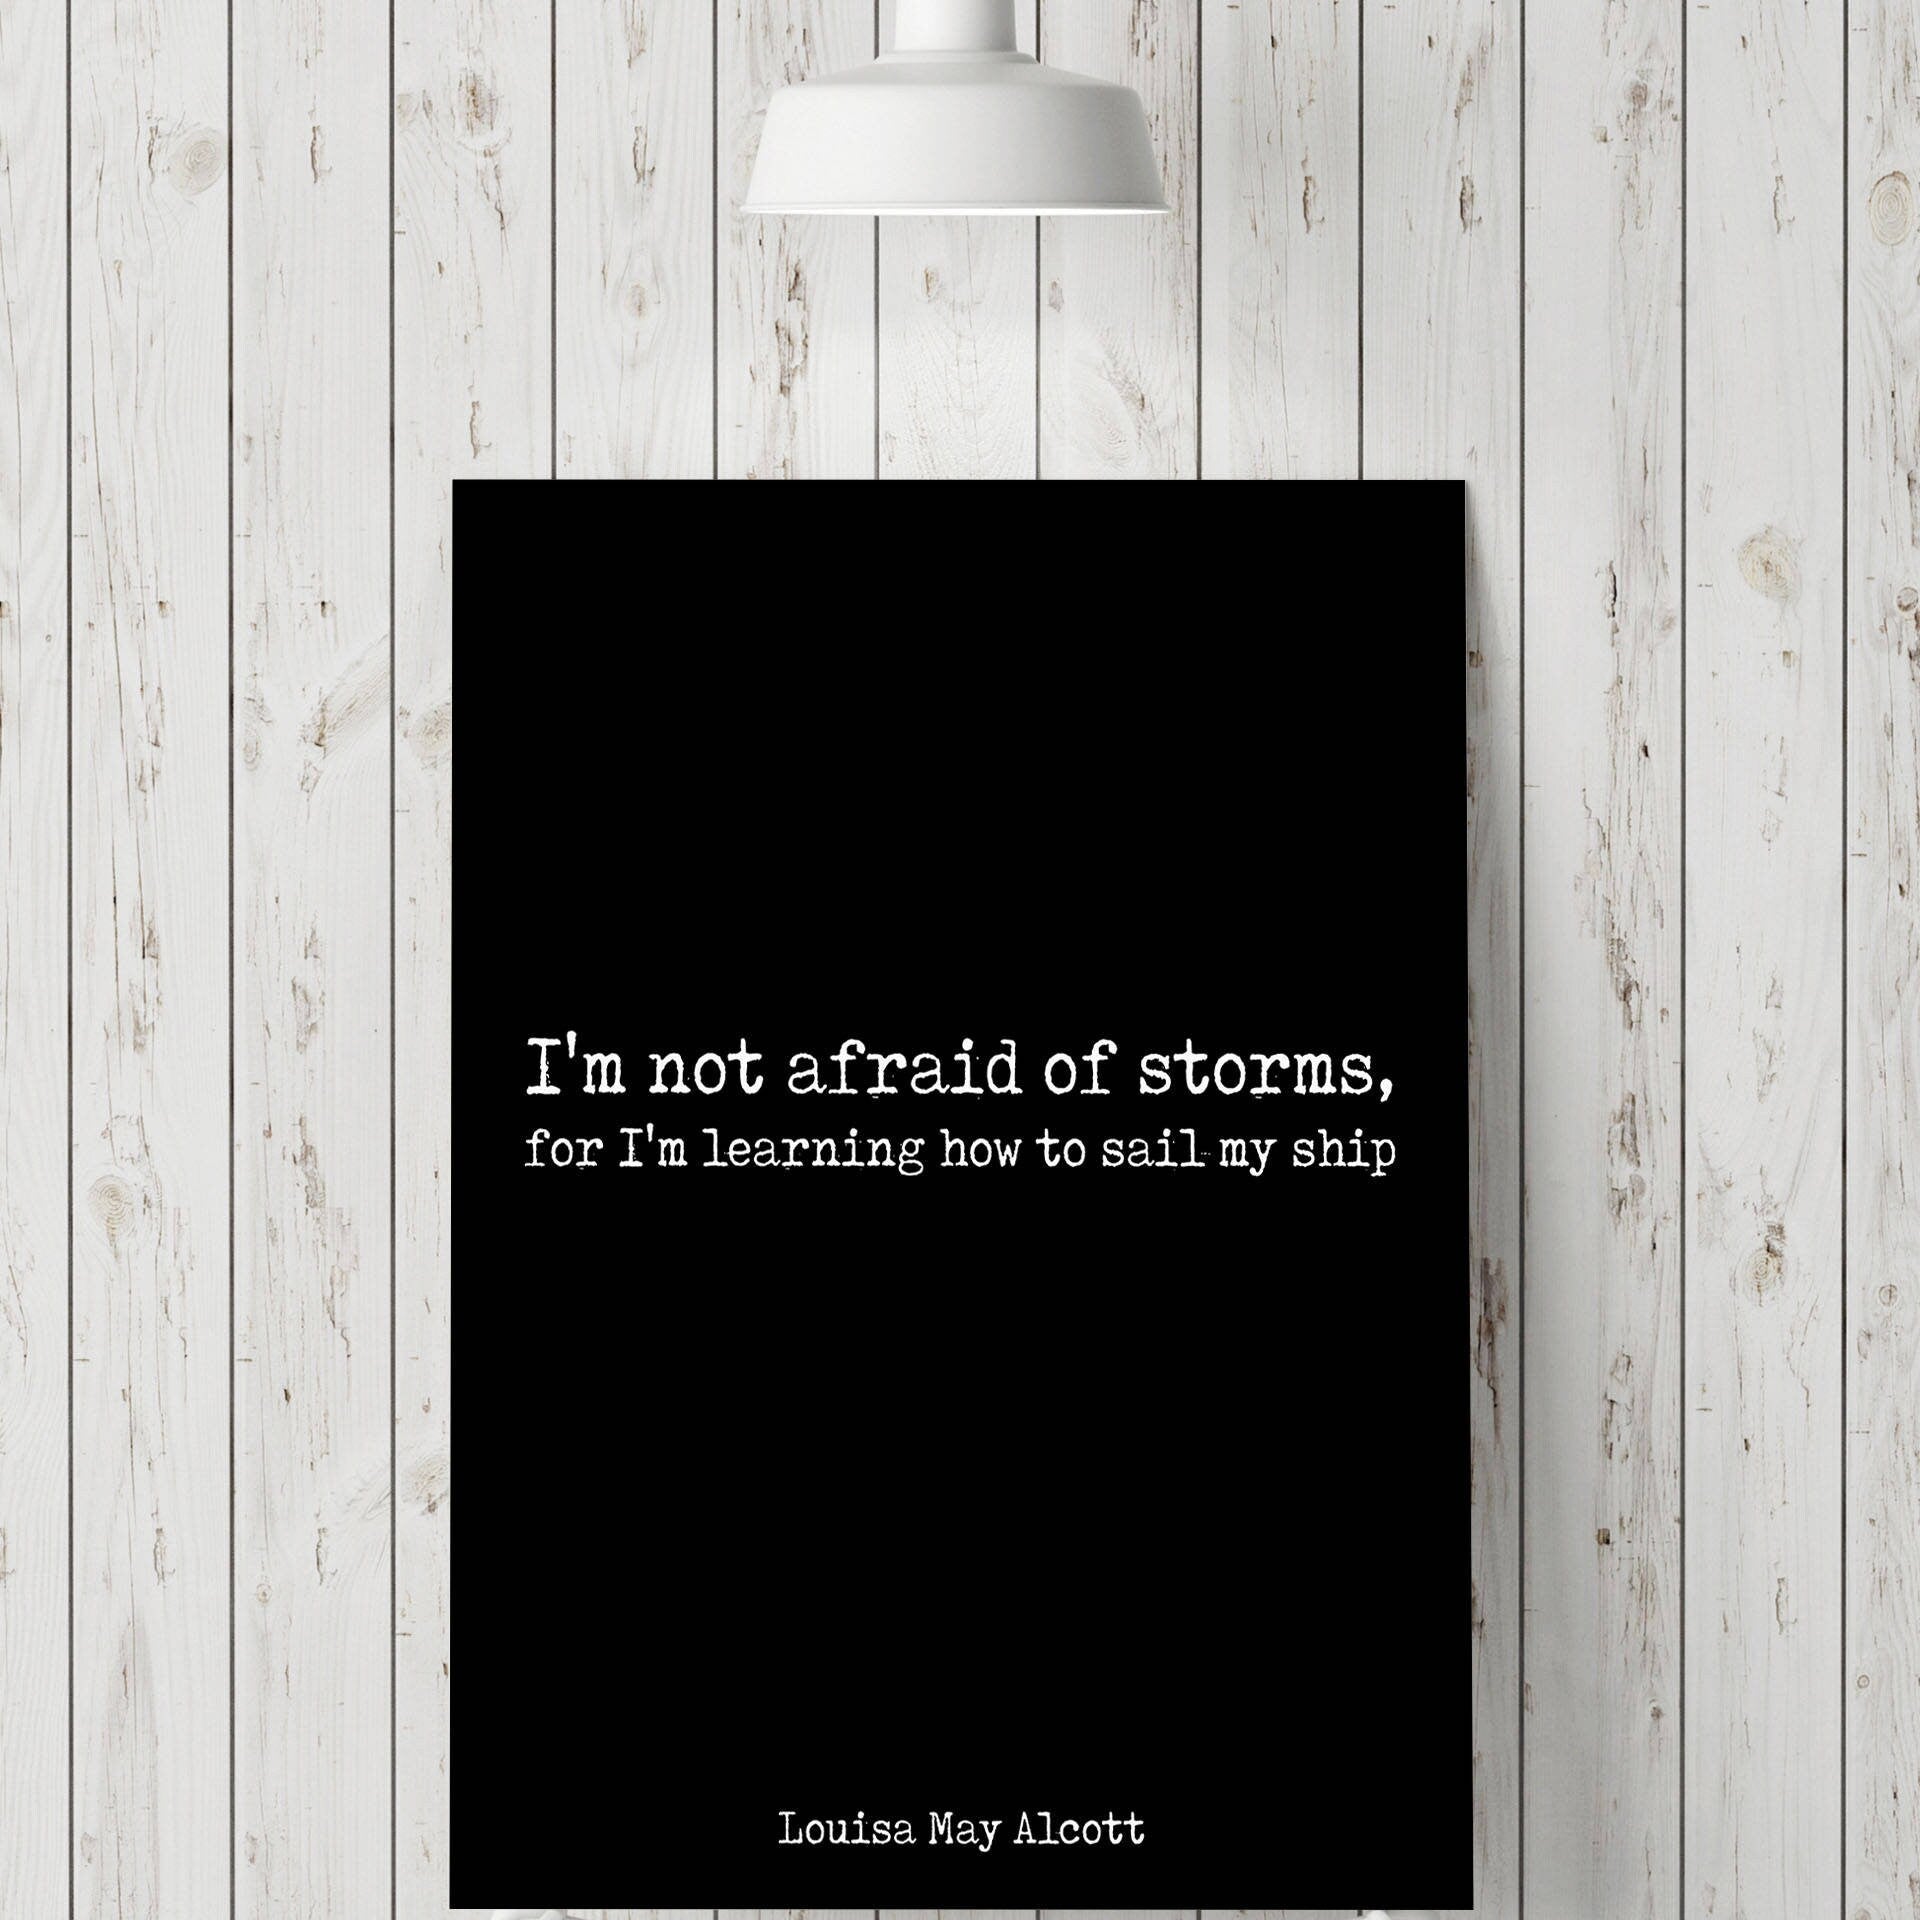 I'm Not Afraid Of Storms Louisa May Alcott Quote Print, Unframed Inspirational Poster